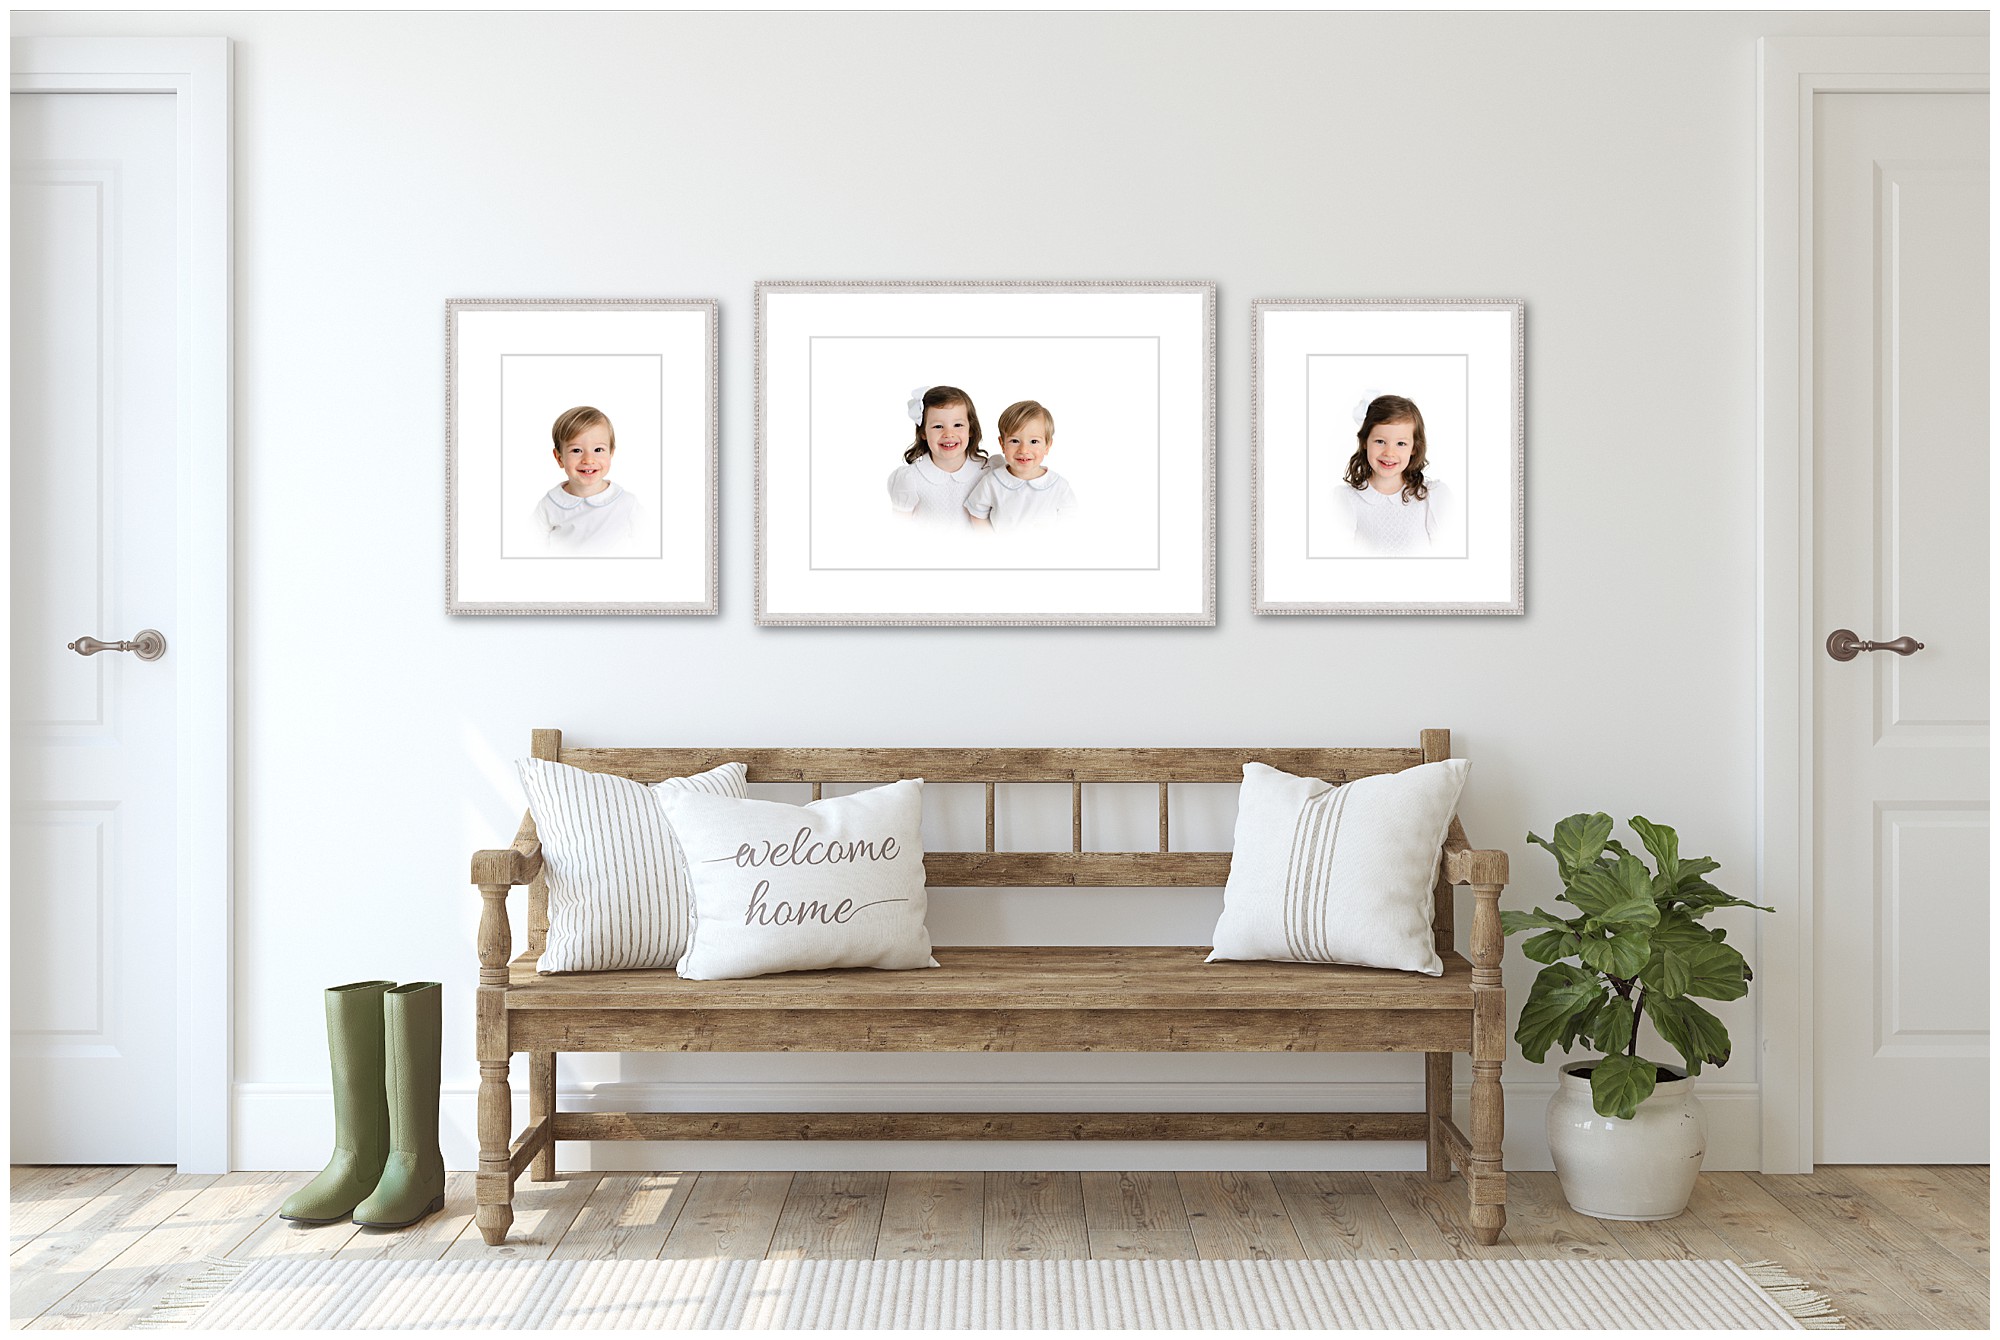 Three Atlanta heirloom portraits framed and hanging on the wall above a bench.